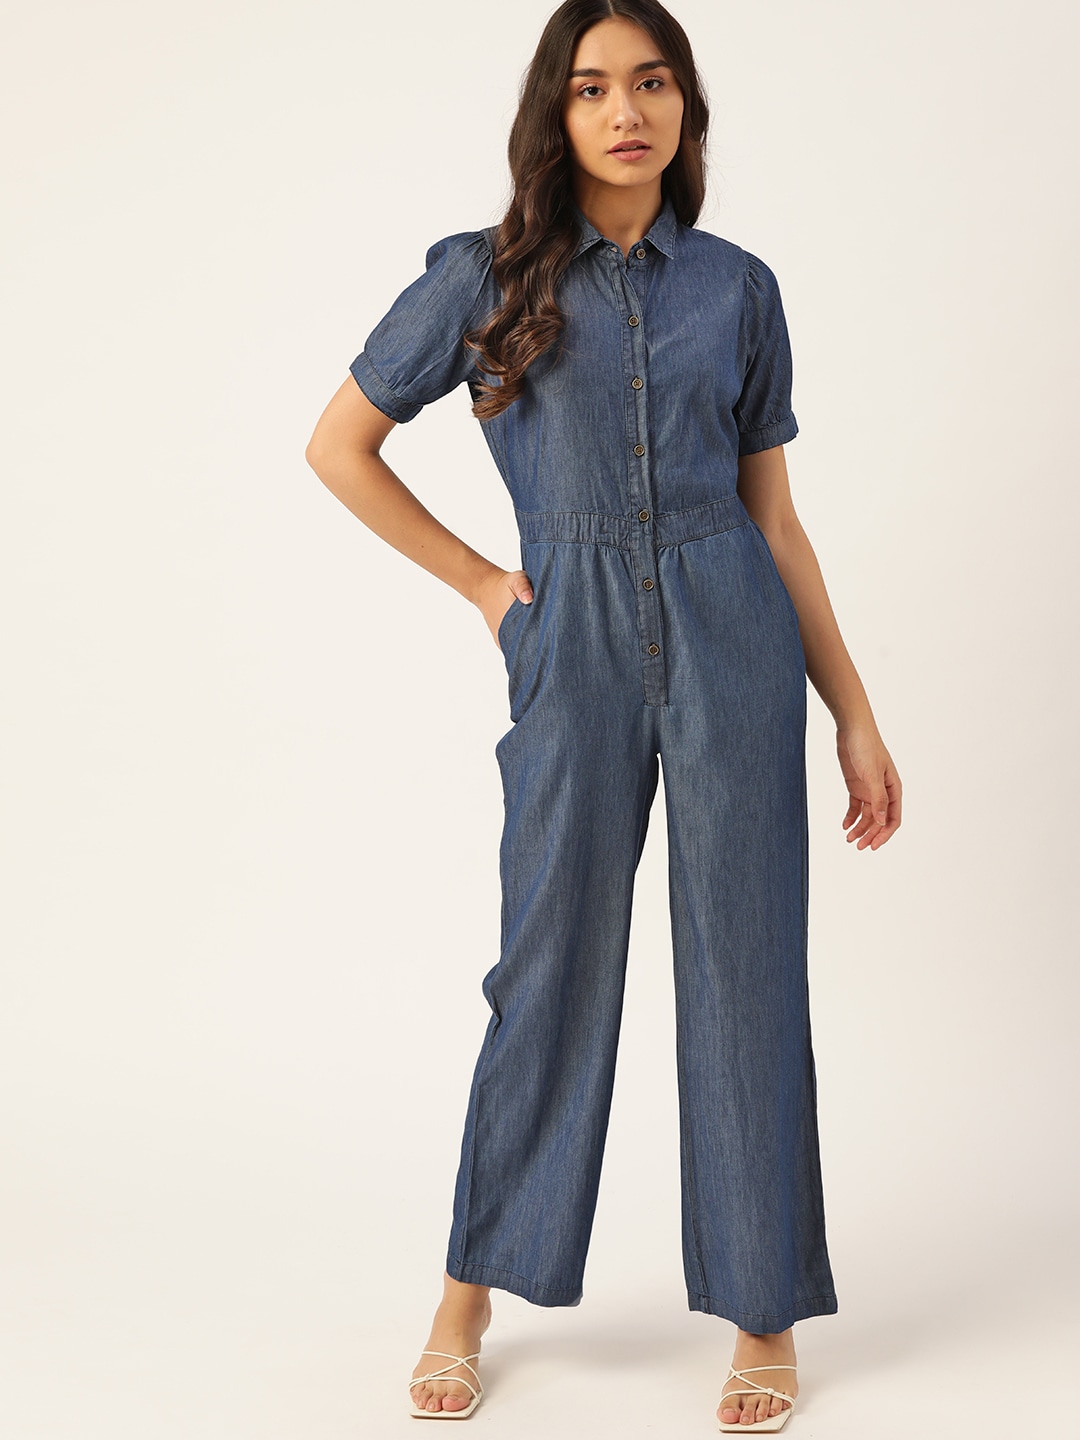 DressBerry Navy Blue Cotton Overall Basic Jumpsuit Price in India